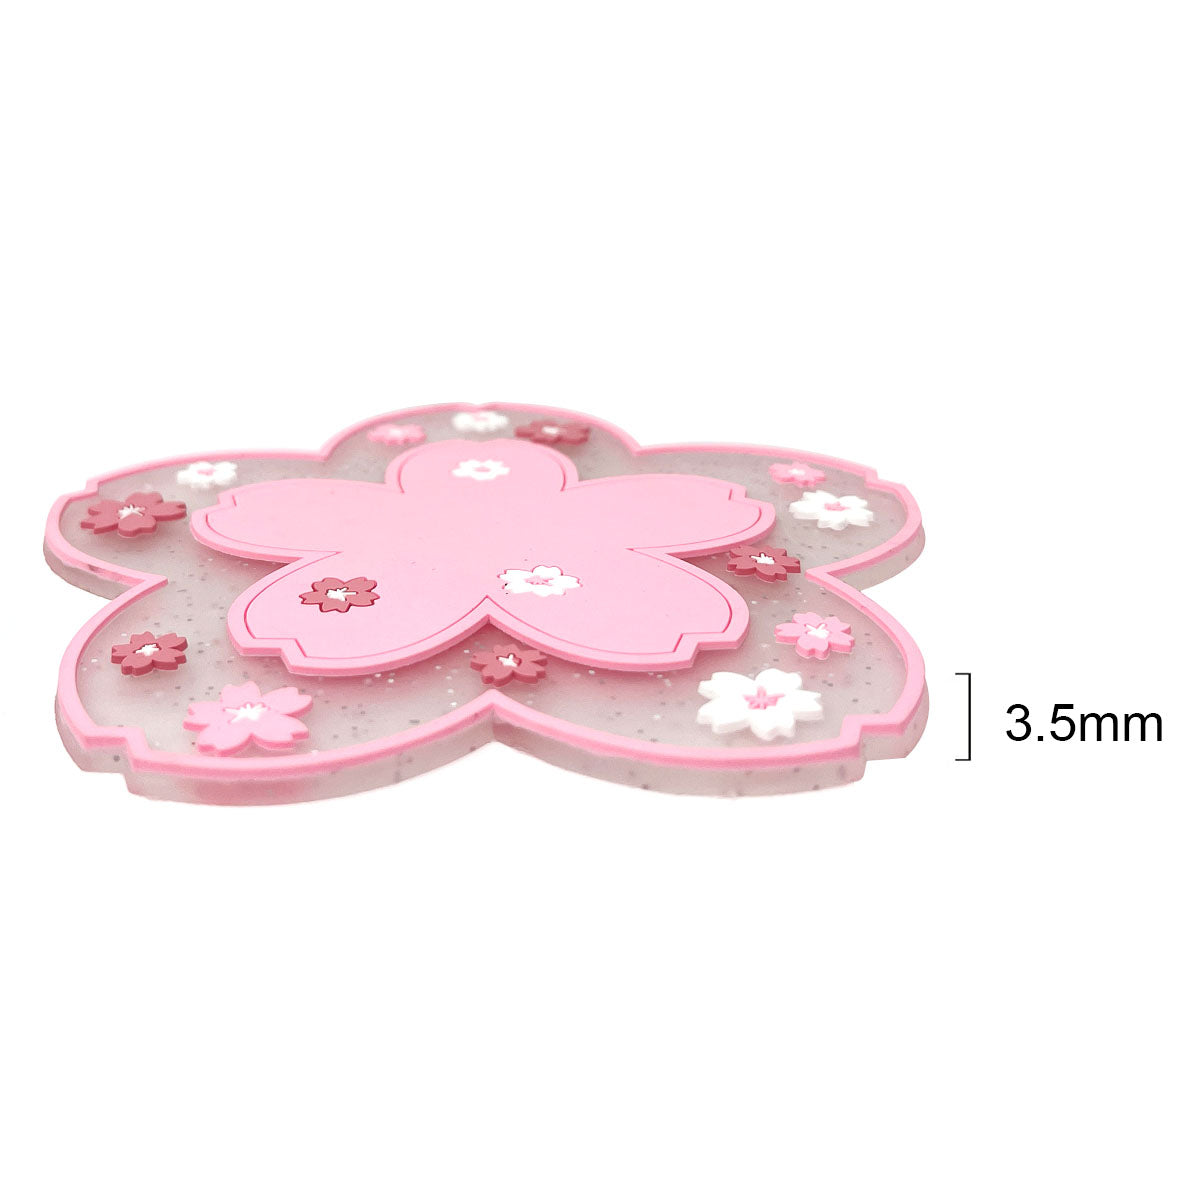 Wrapables Cherry Blossom Coasters for Cups and Drinks (Set of 2)